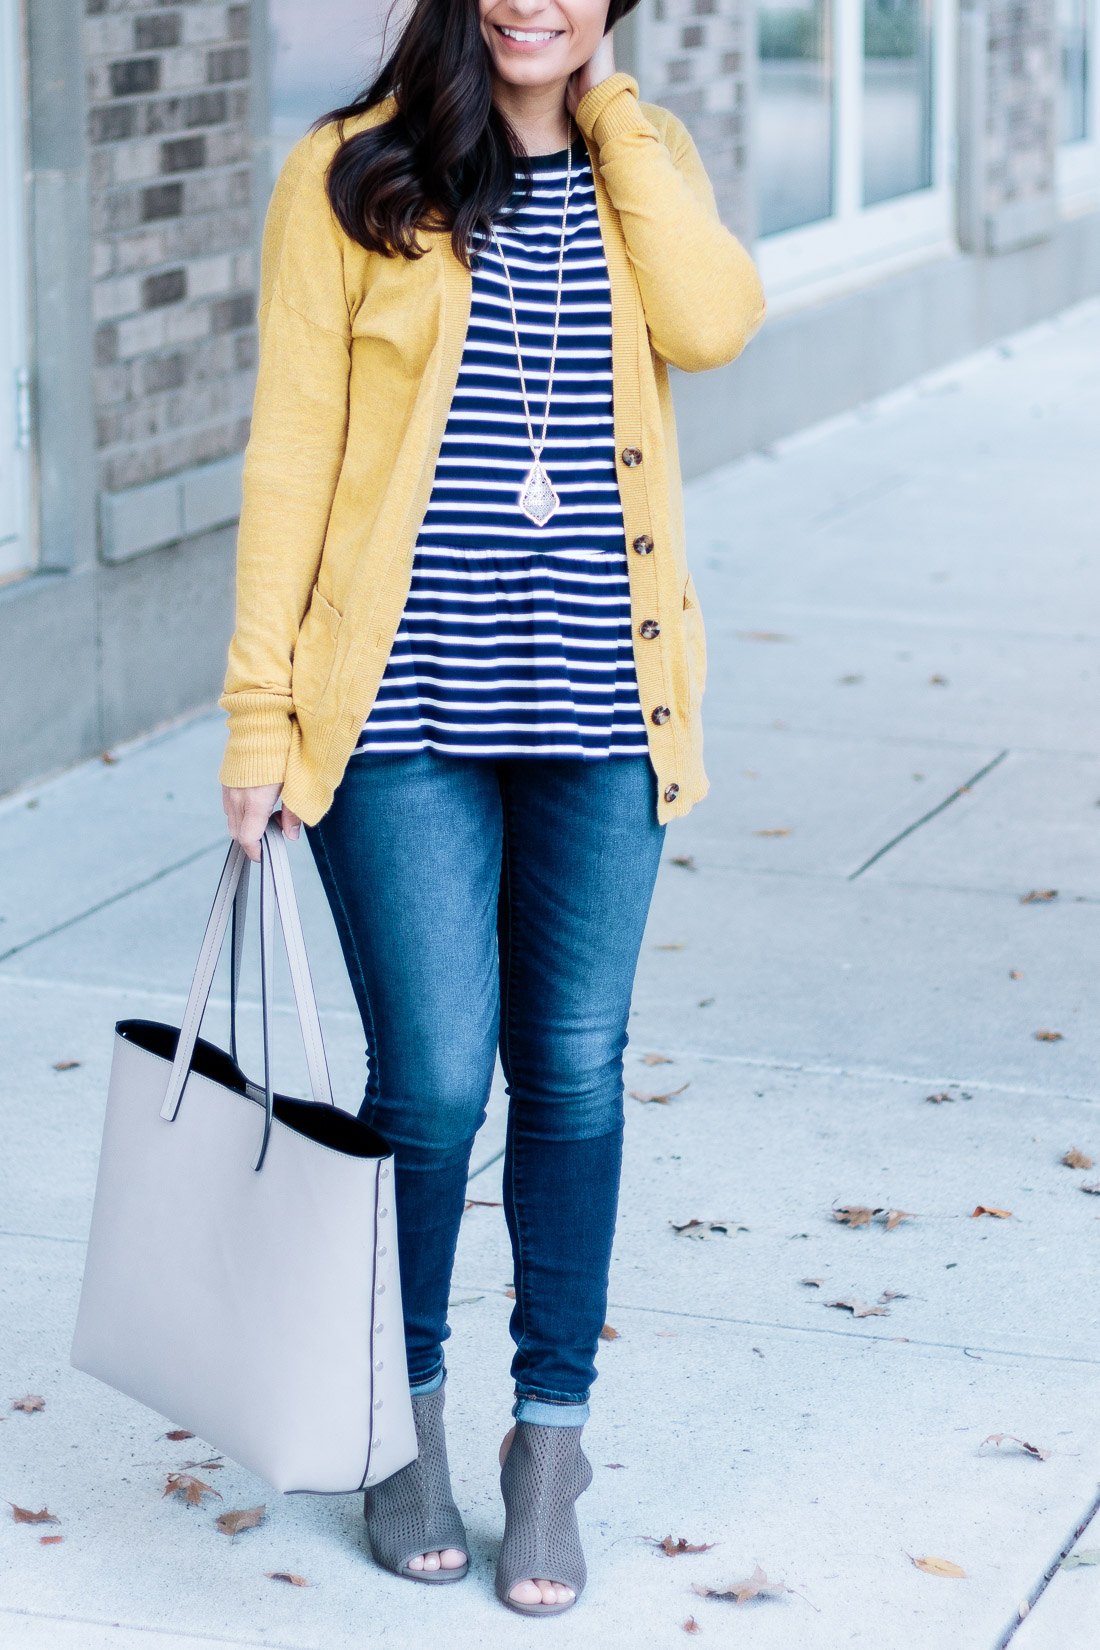 Striped Peplum Top Outfit